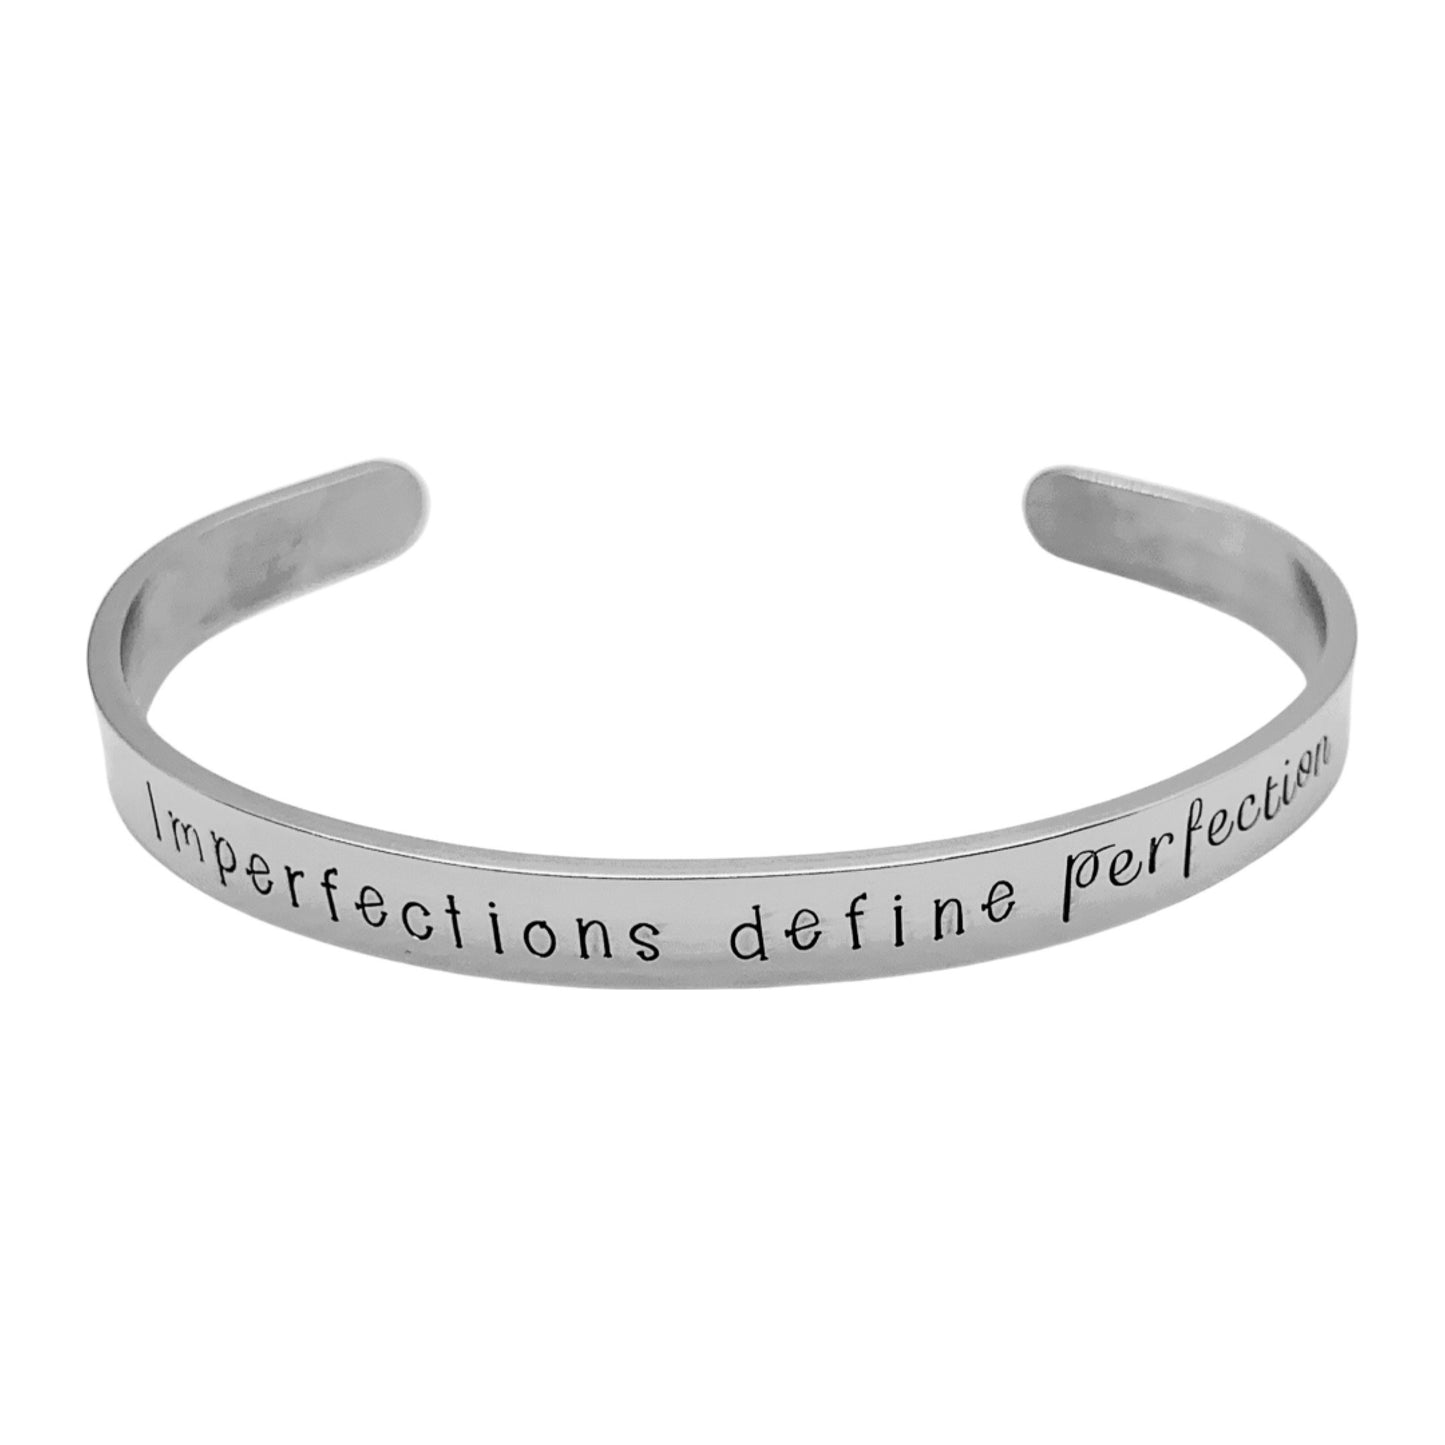 Imperfections define perfection (Colleen Hoover) - Cuff Bracelet